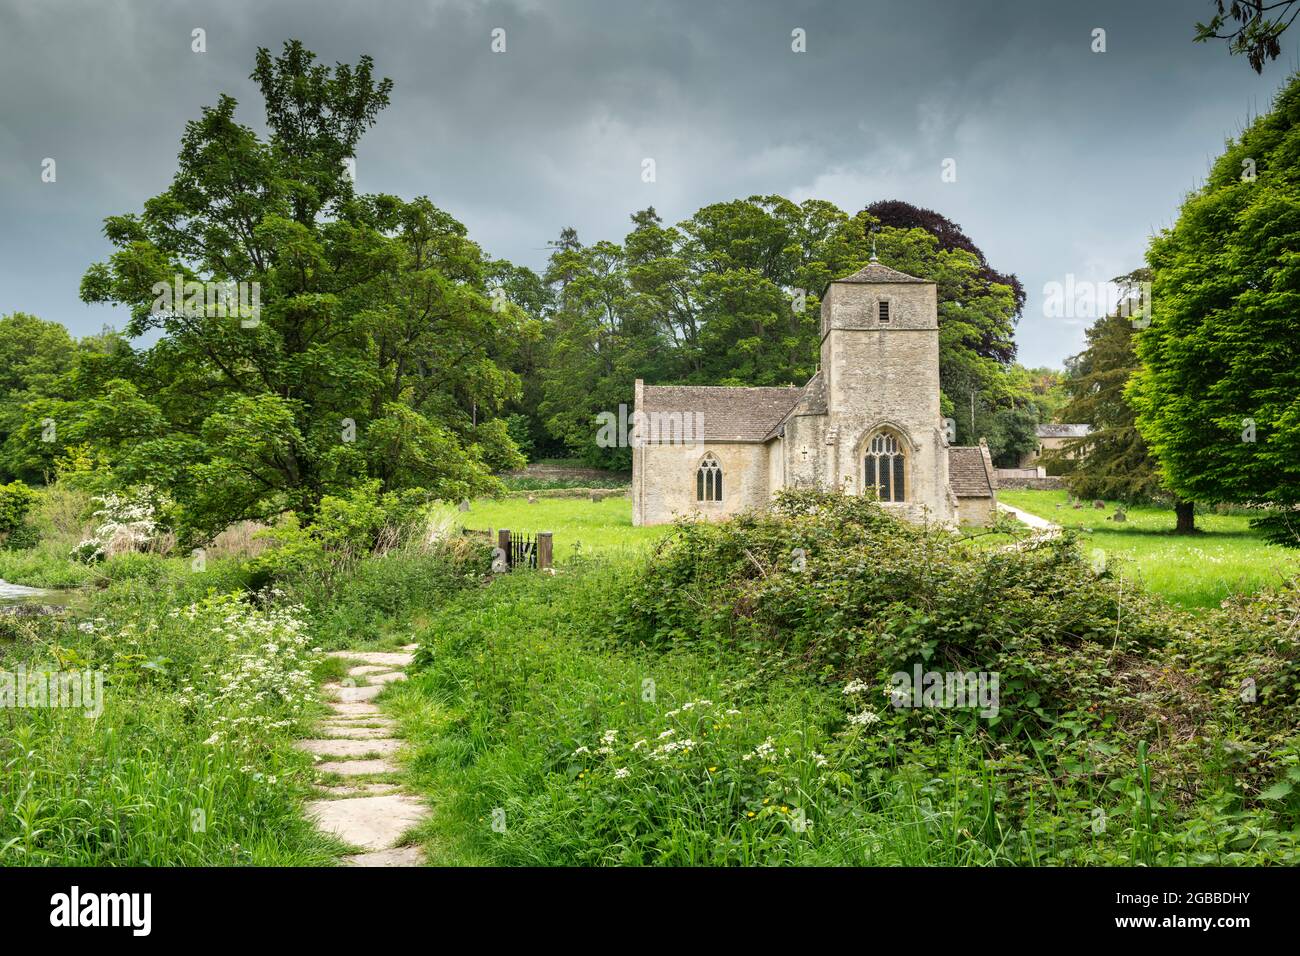 St. Michael and St. Martin's Church in spring in the Cotswolds village of Eastleach Turville, Gloucestershire, England, United Kingdom, Europe Stock Photo